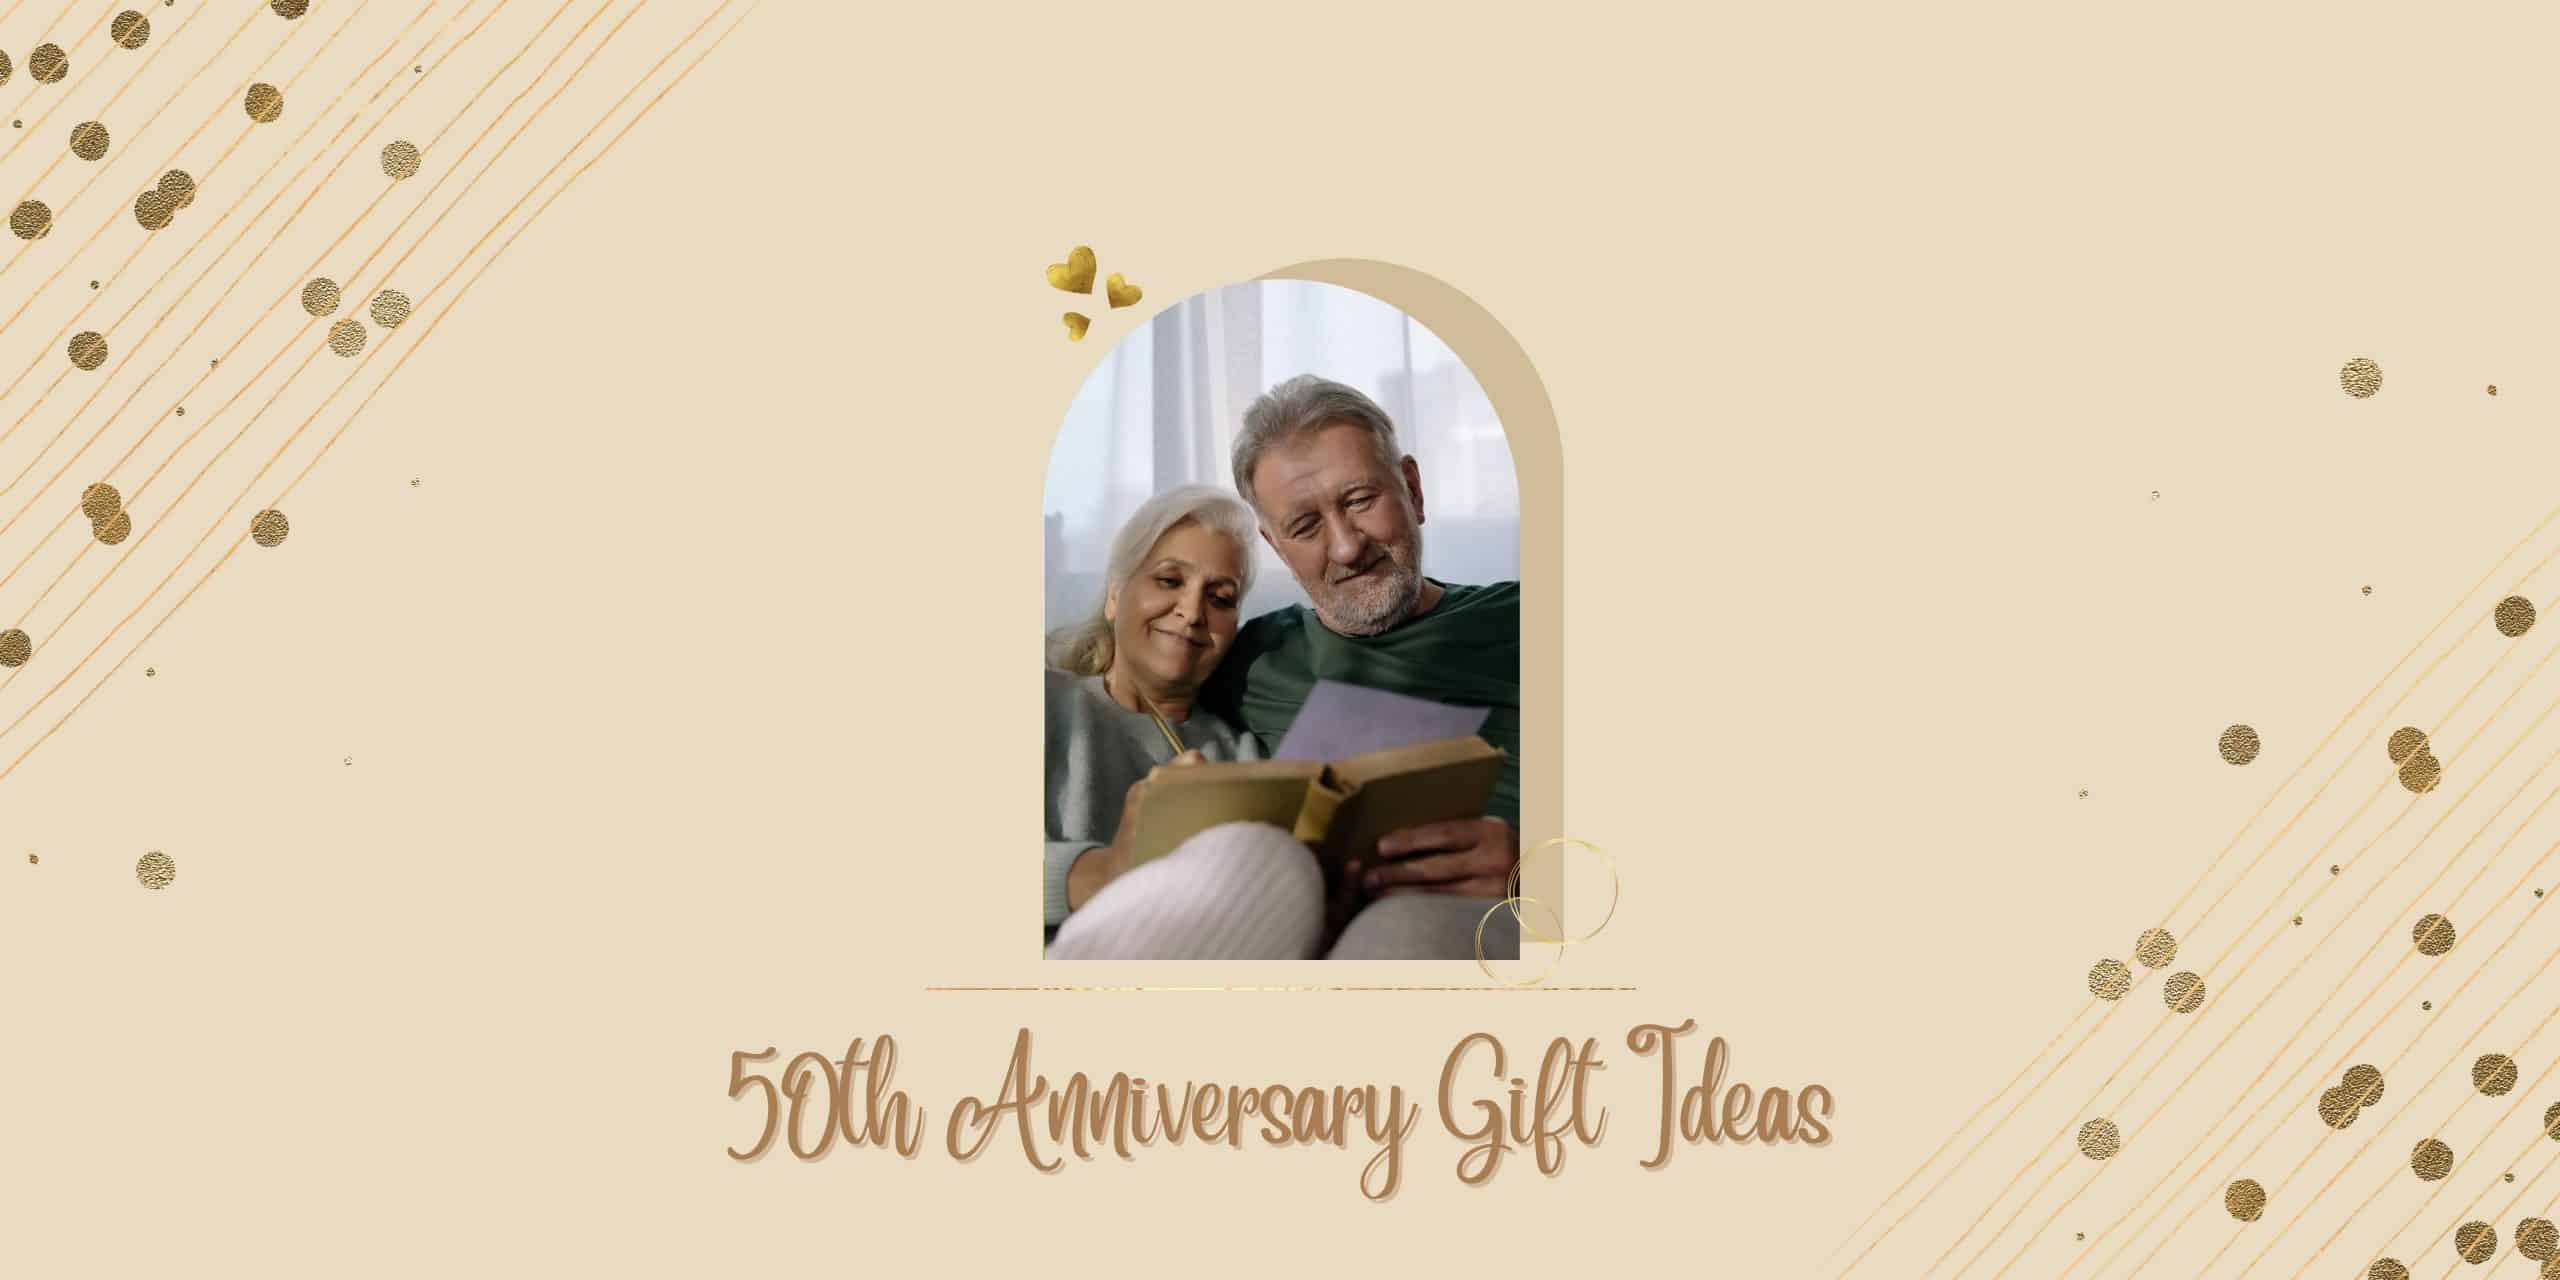 50th Wedding Anniversary Gifts in 2022: 60+ Golden Ideas To Honor A Lasting Love